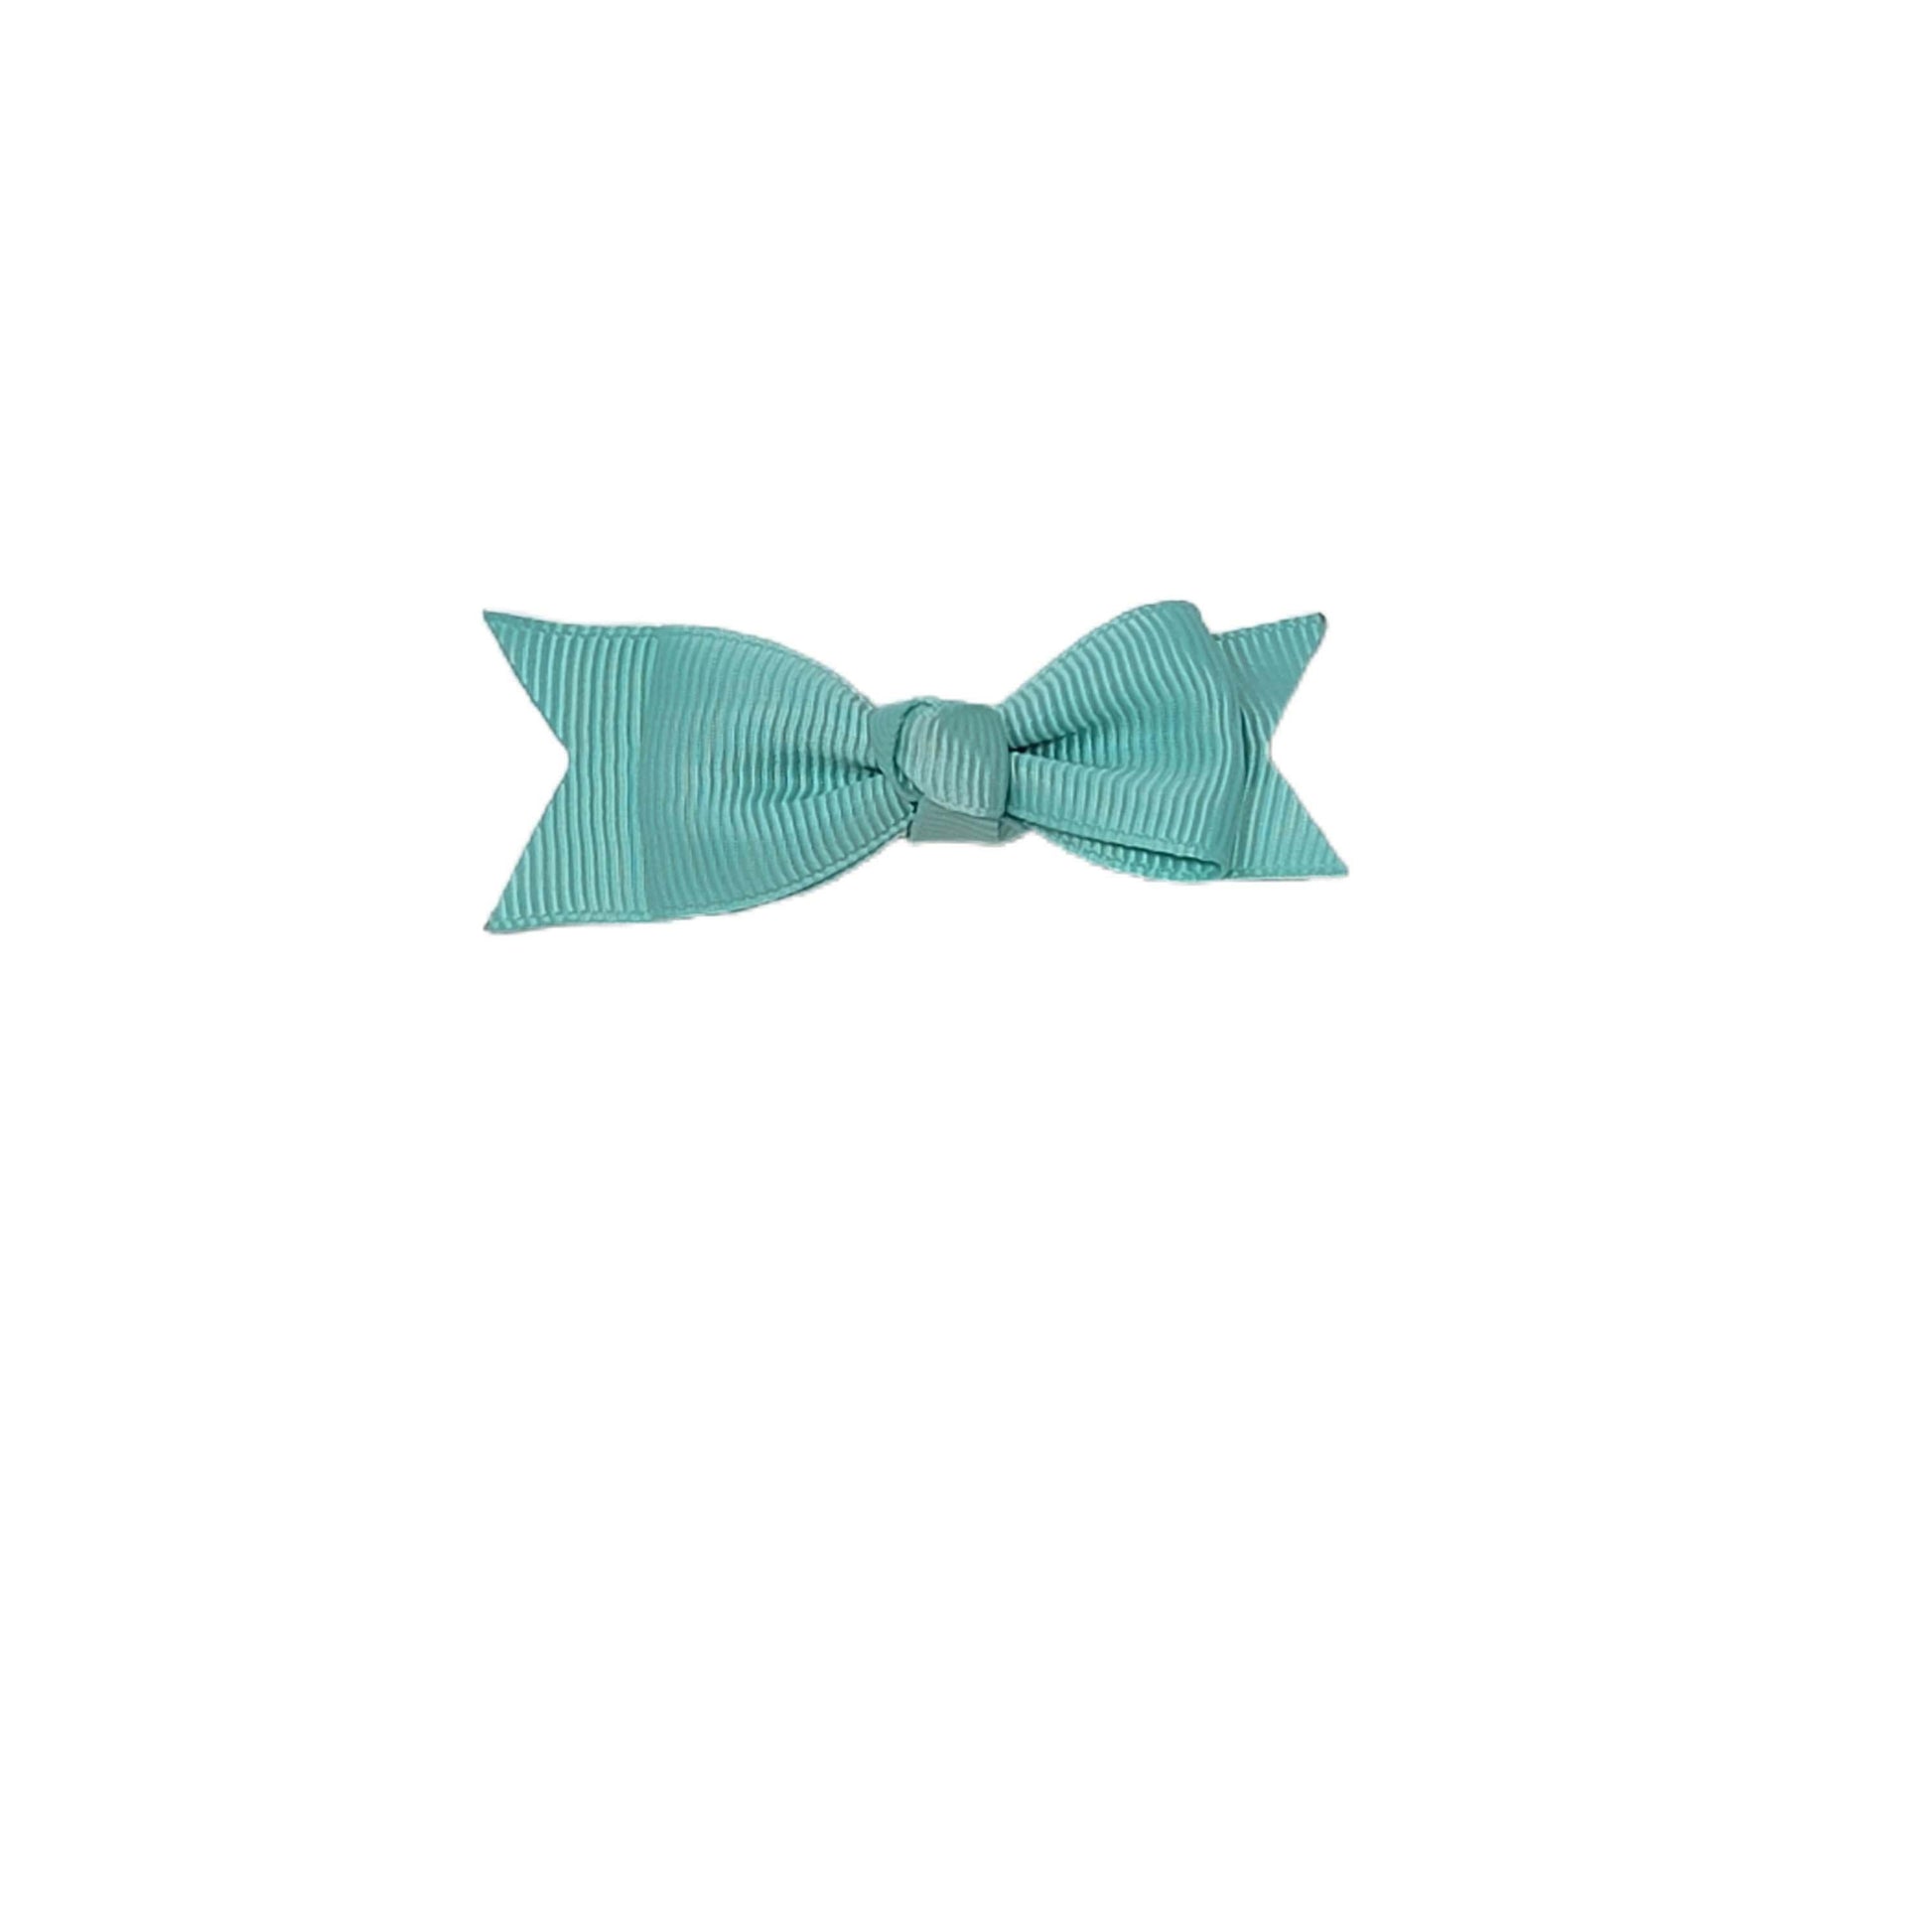 Itty Bitty Knotted Ribbon Bow 2.5" - Waterfall Wishes